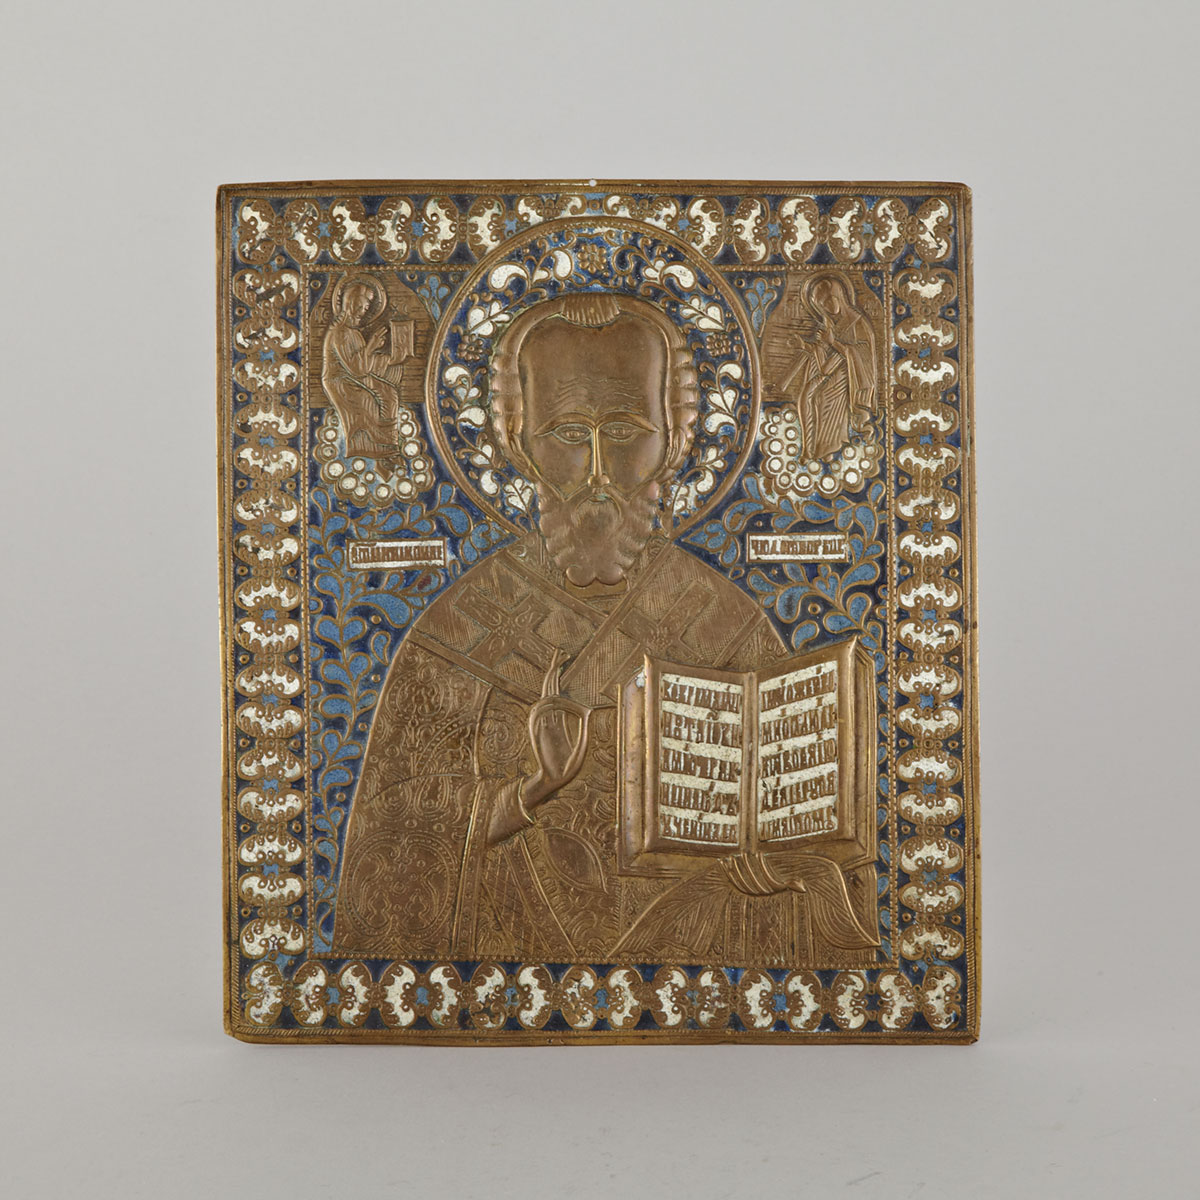 Russian Blue and White Enamelled Bronze Icon of St. Nicholas the Miracle Worker, 19th century